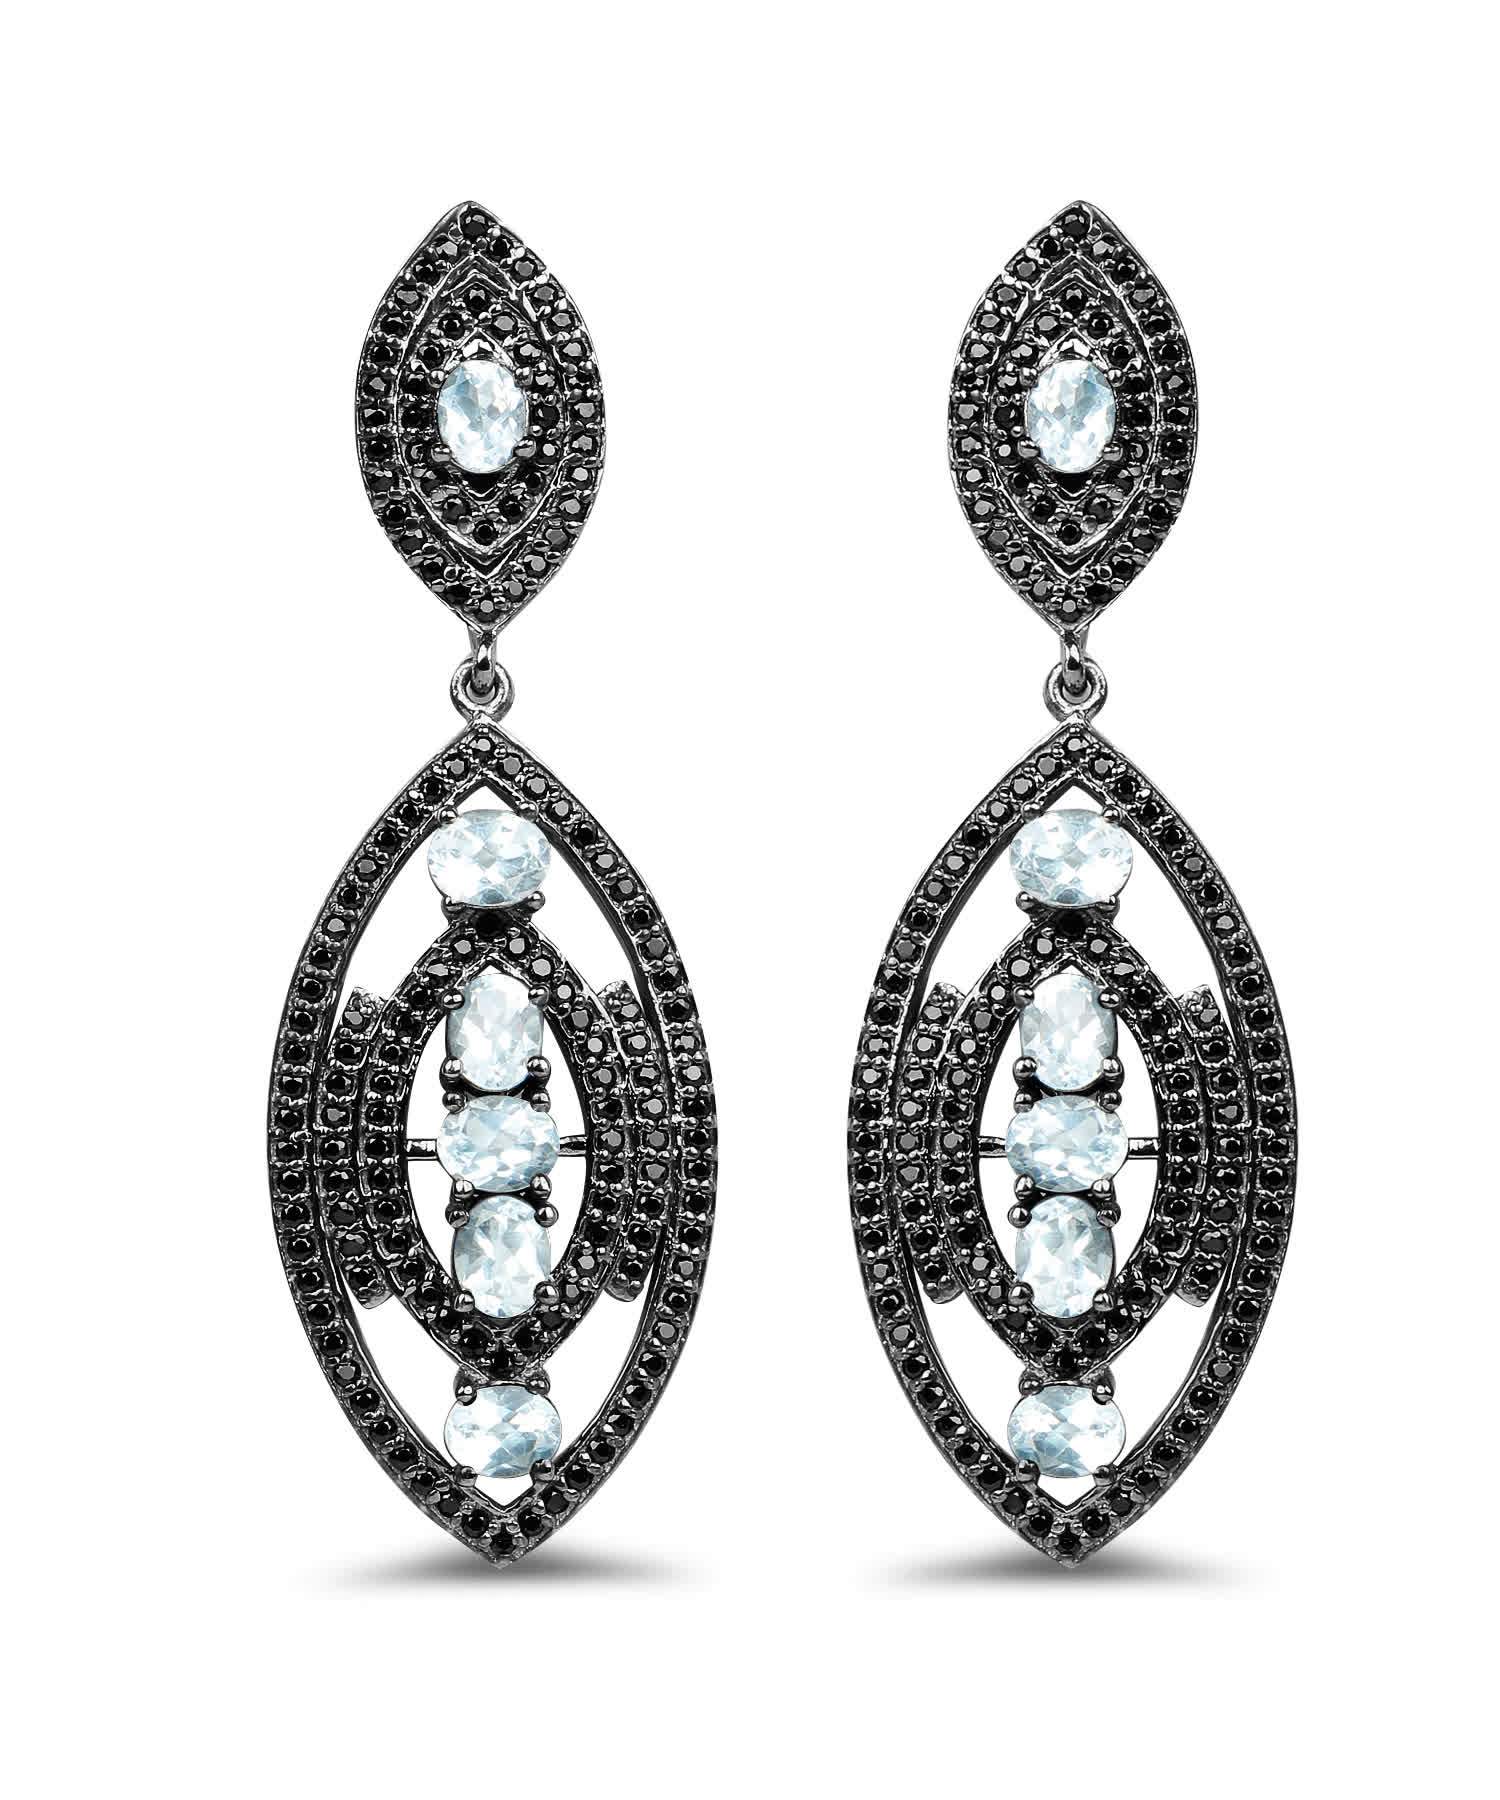 8.80ctw Natural Sky Blue Topaz and Black Spinel Rhodium Plated 925 Sterling Silver Antique Style Dangle Earrings View 1